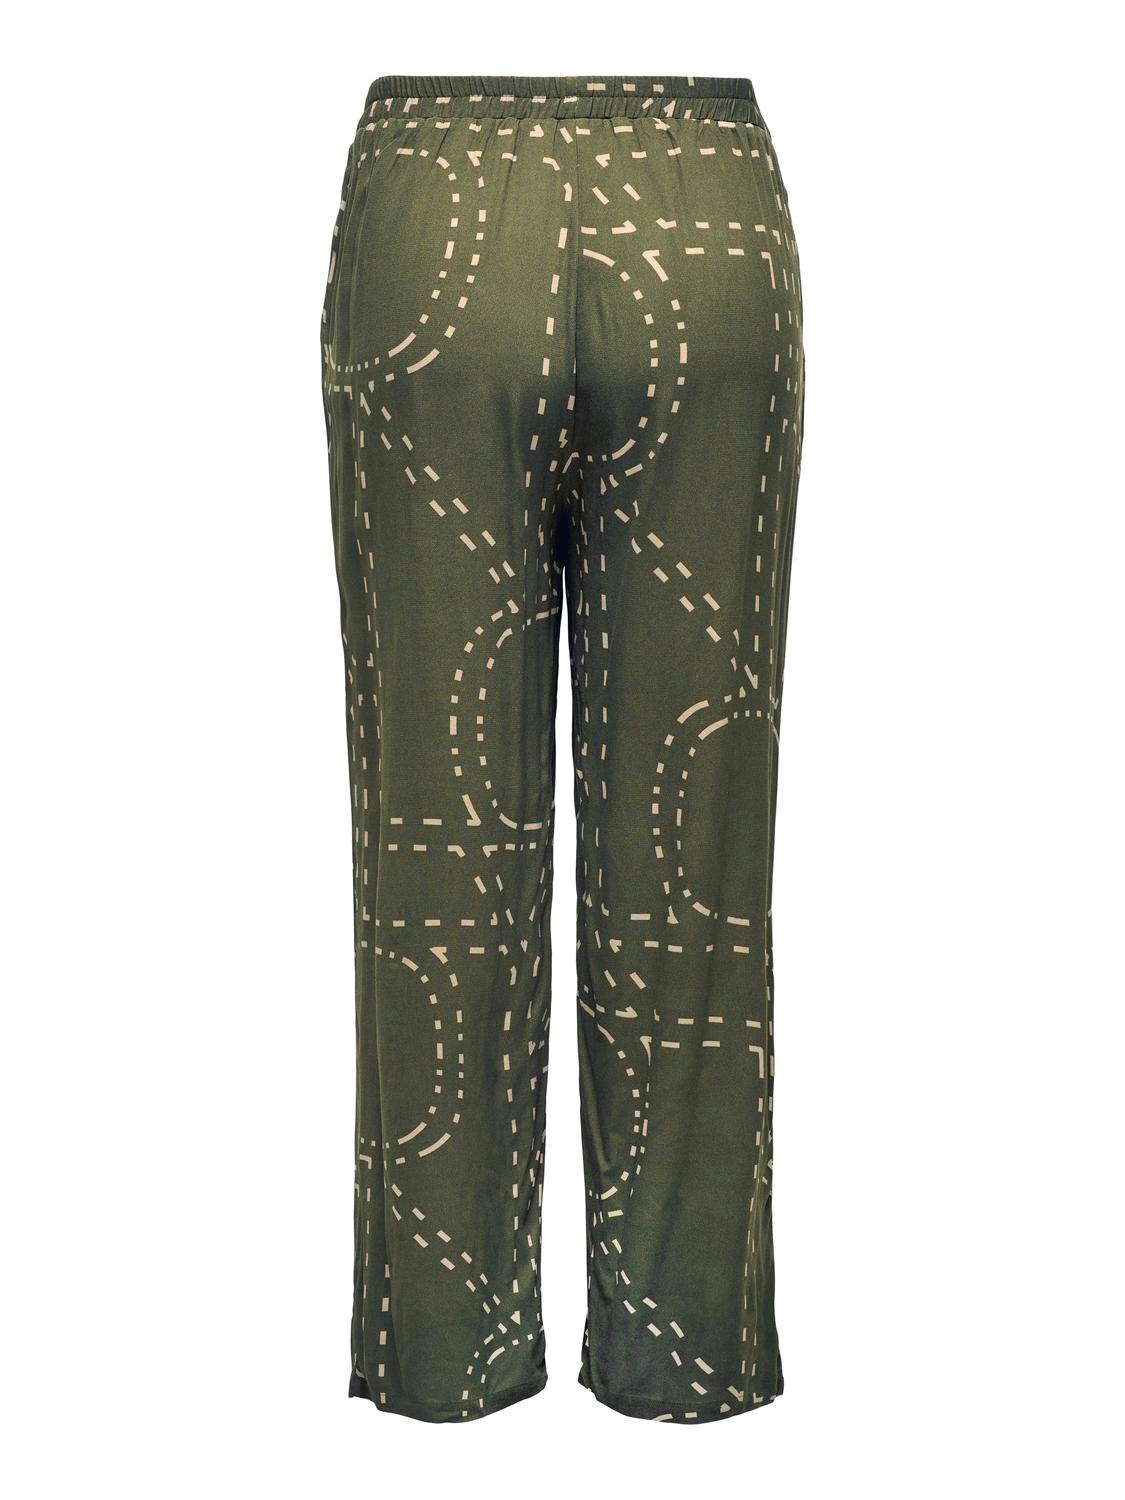 ONLY Curvy trousers with print -Kalamata - 15316963